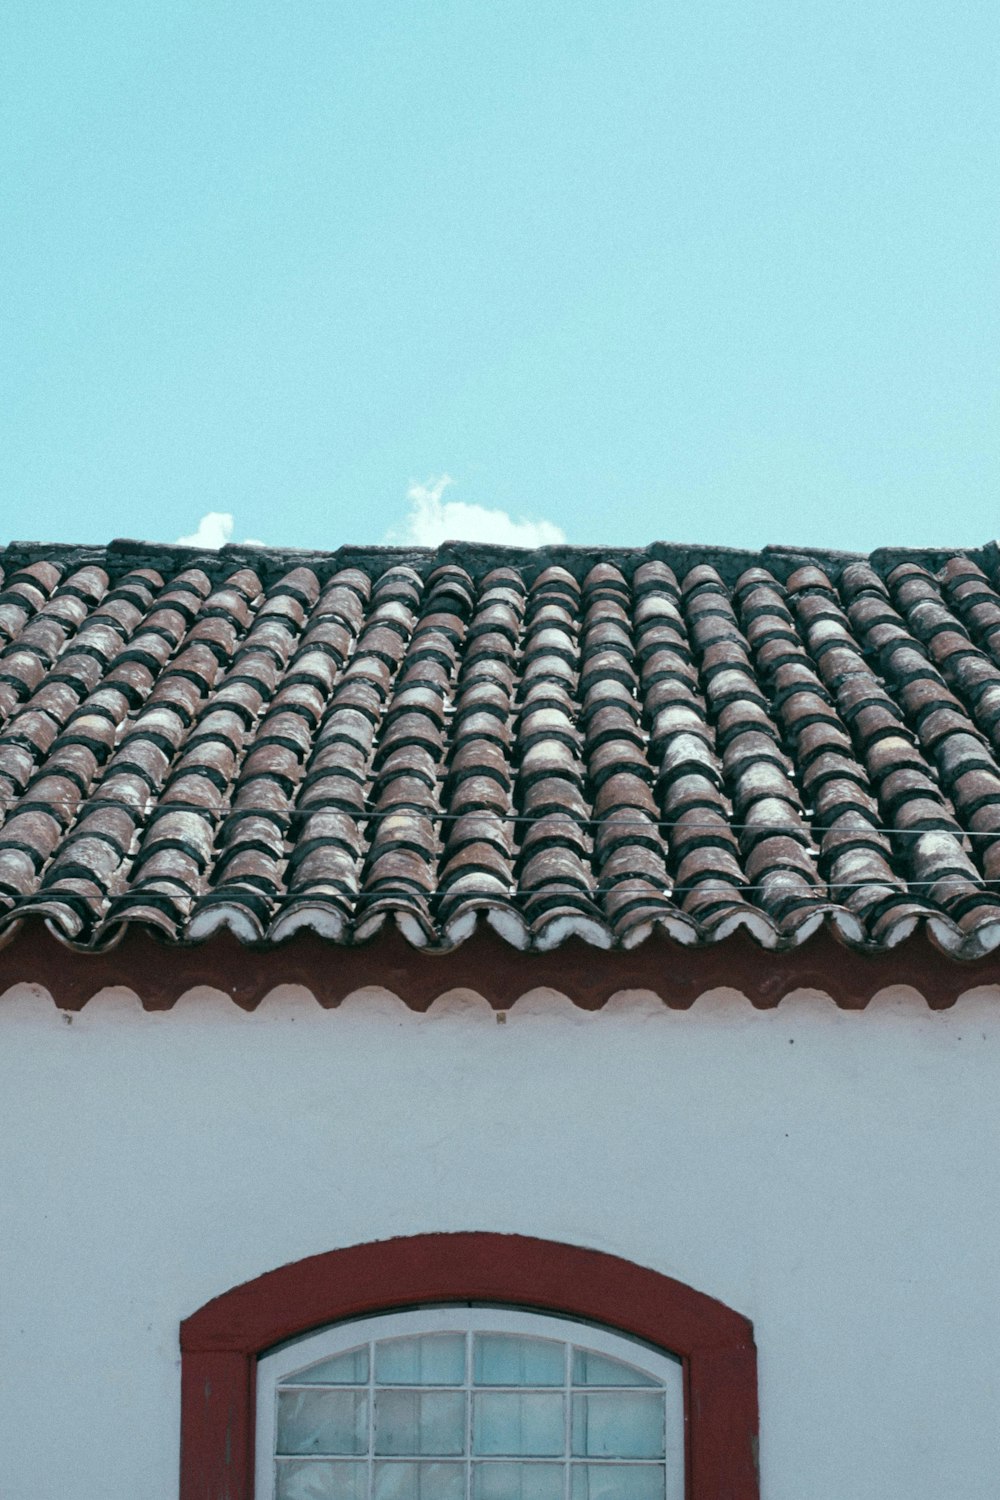 brown roof tiles under white sky during daytime